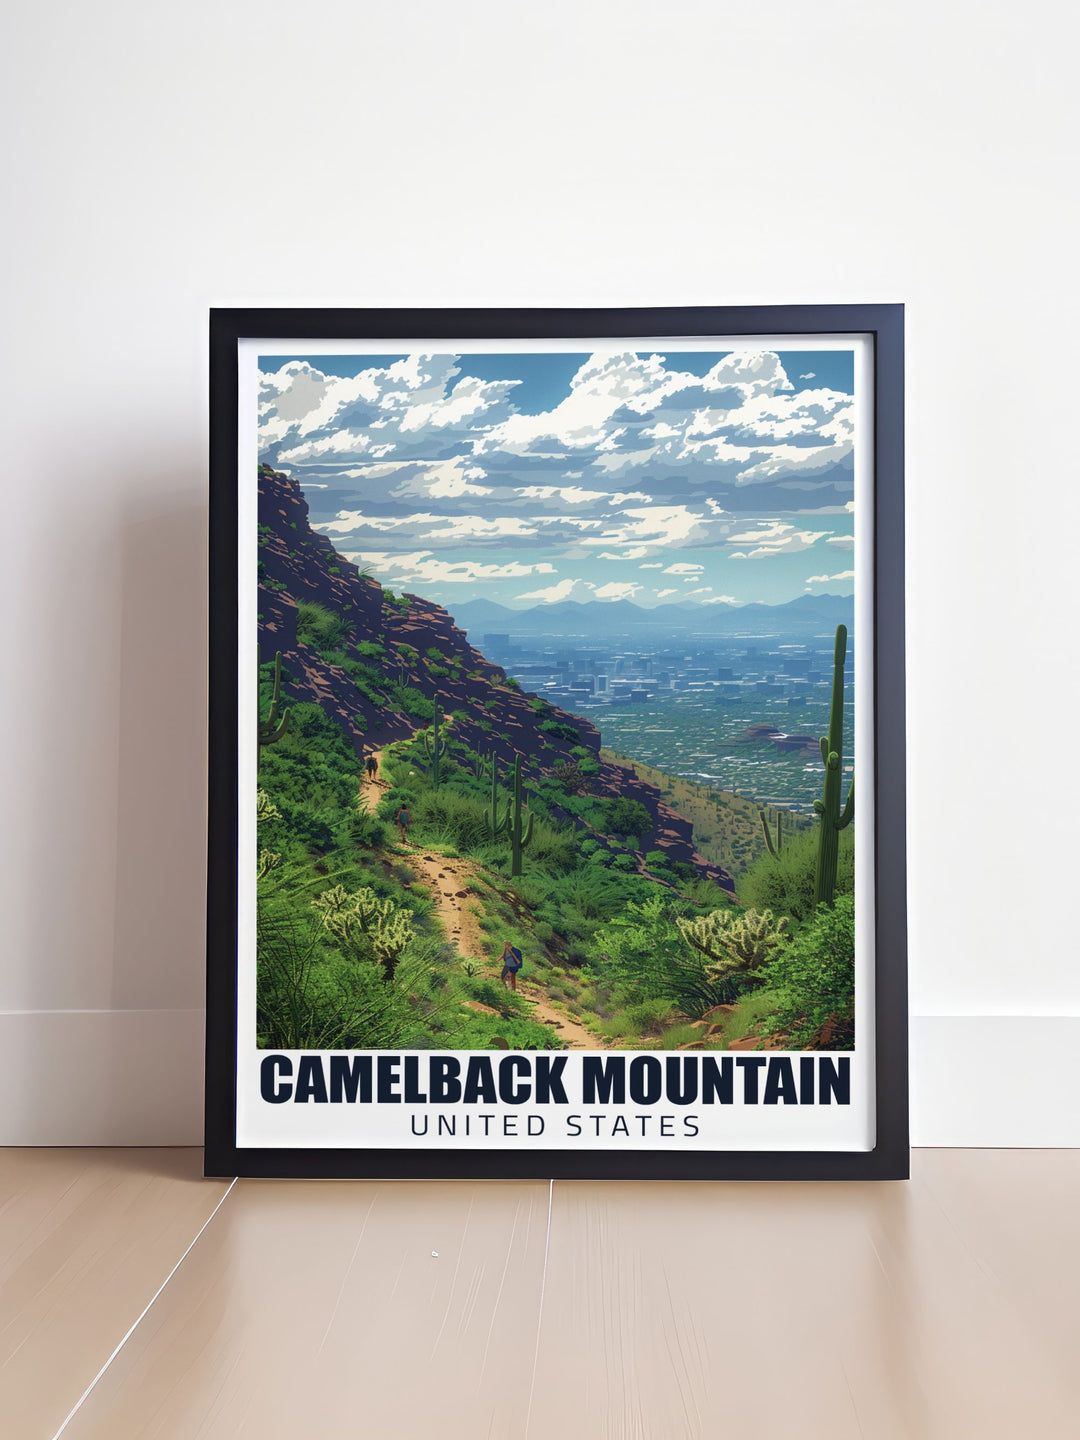 This Cholla Trail home decor piece features a beautifully detailed Arizona travel print perfect for nature lovers. The artwork highlights the scenic views of Mt. Camelback making it an excellent addition to any room or a thoughtful travel gift.